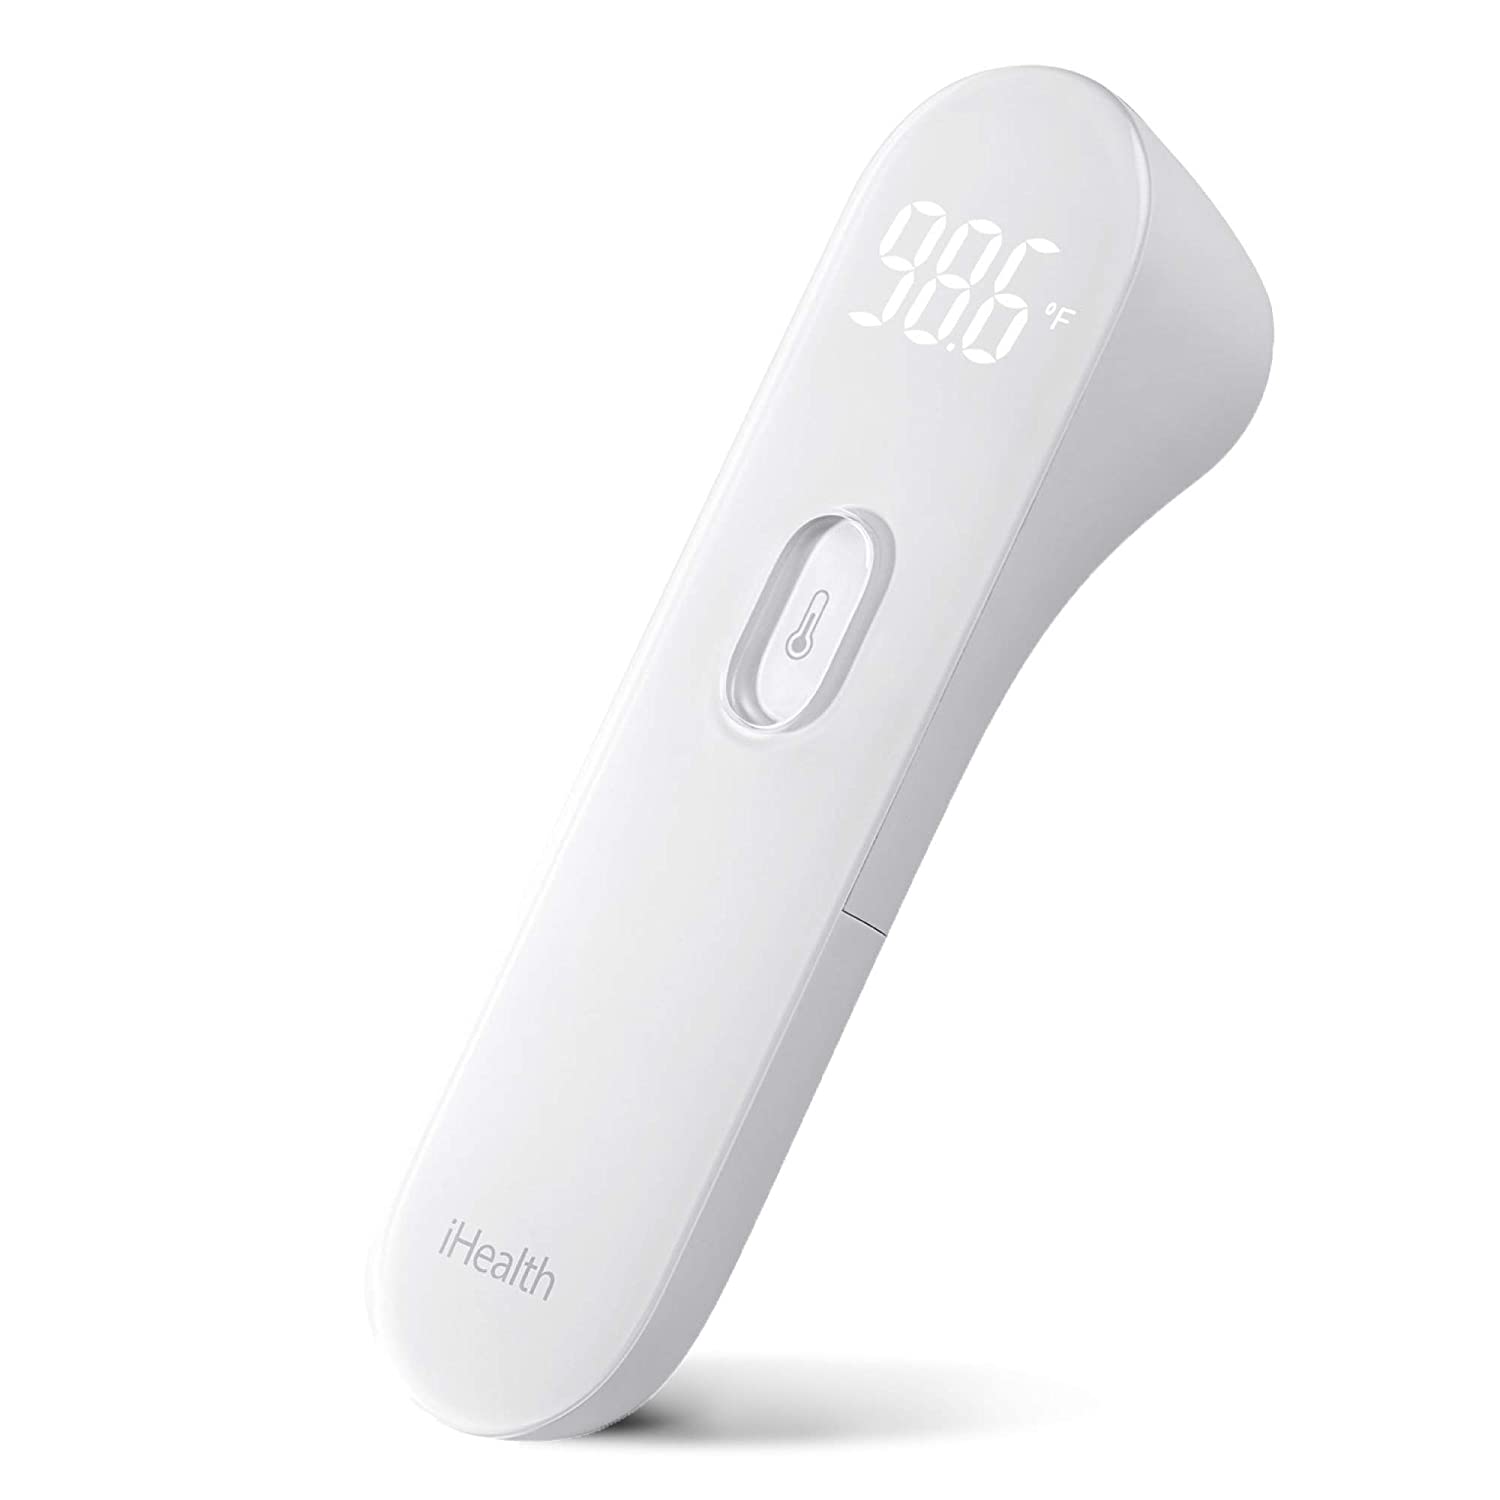 Ihealth Non-Contact Infared Forehead Thermometer